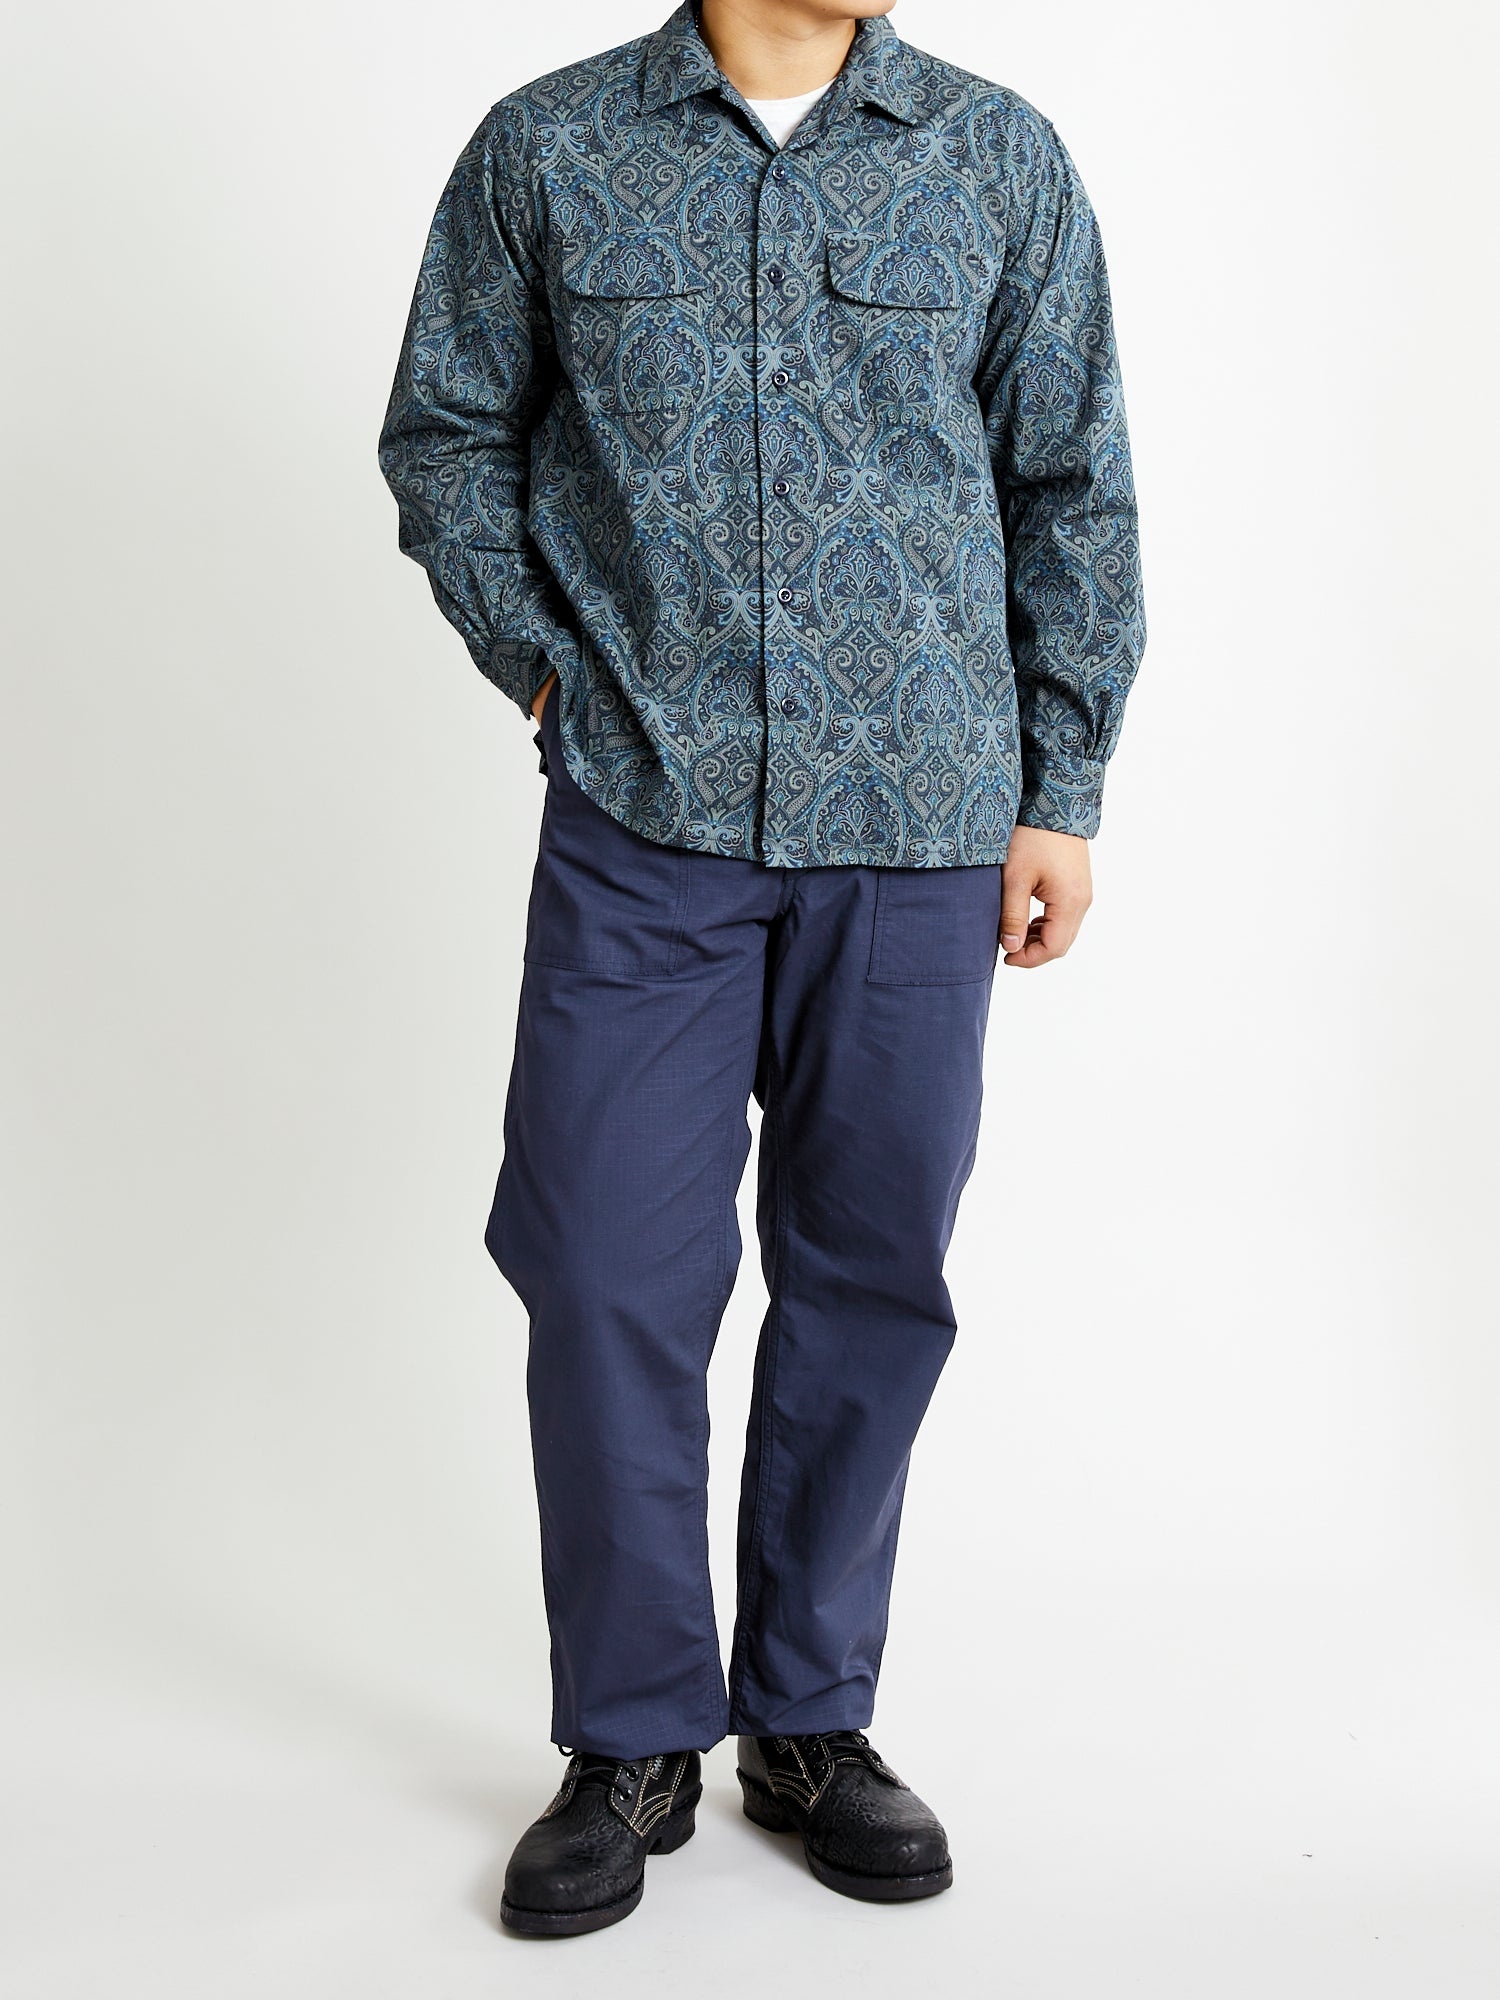 Classic Shirt in Navy Cotton Paisley Print - 12